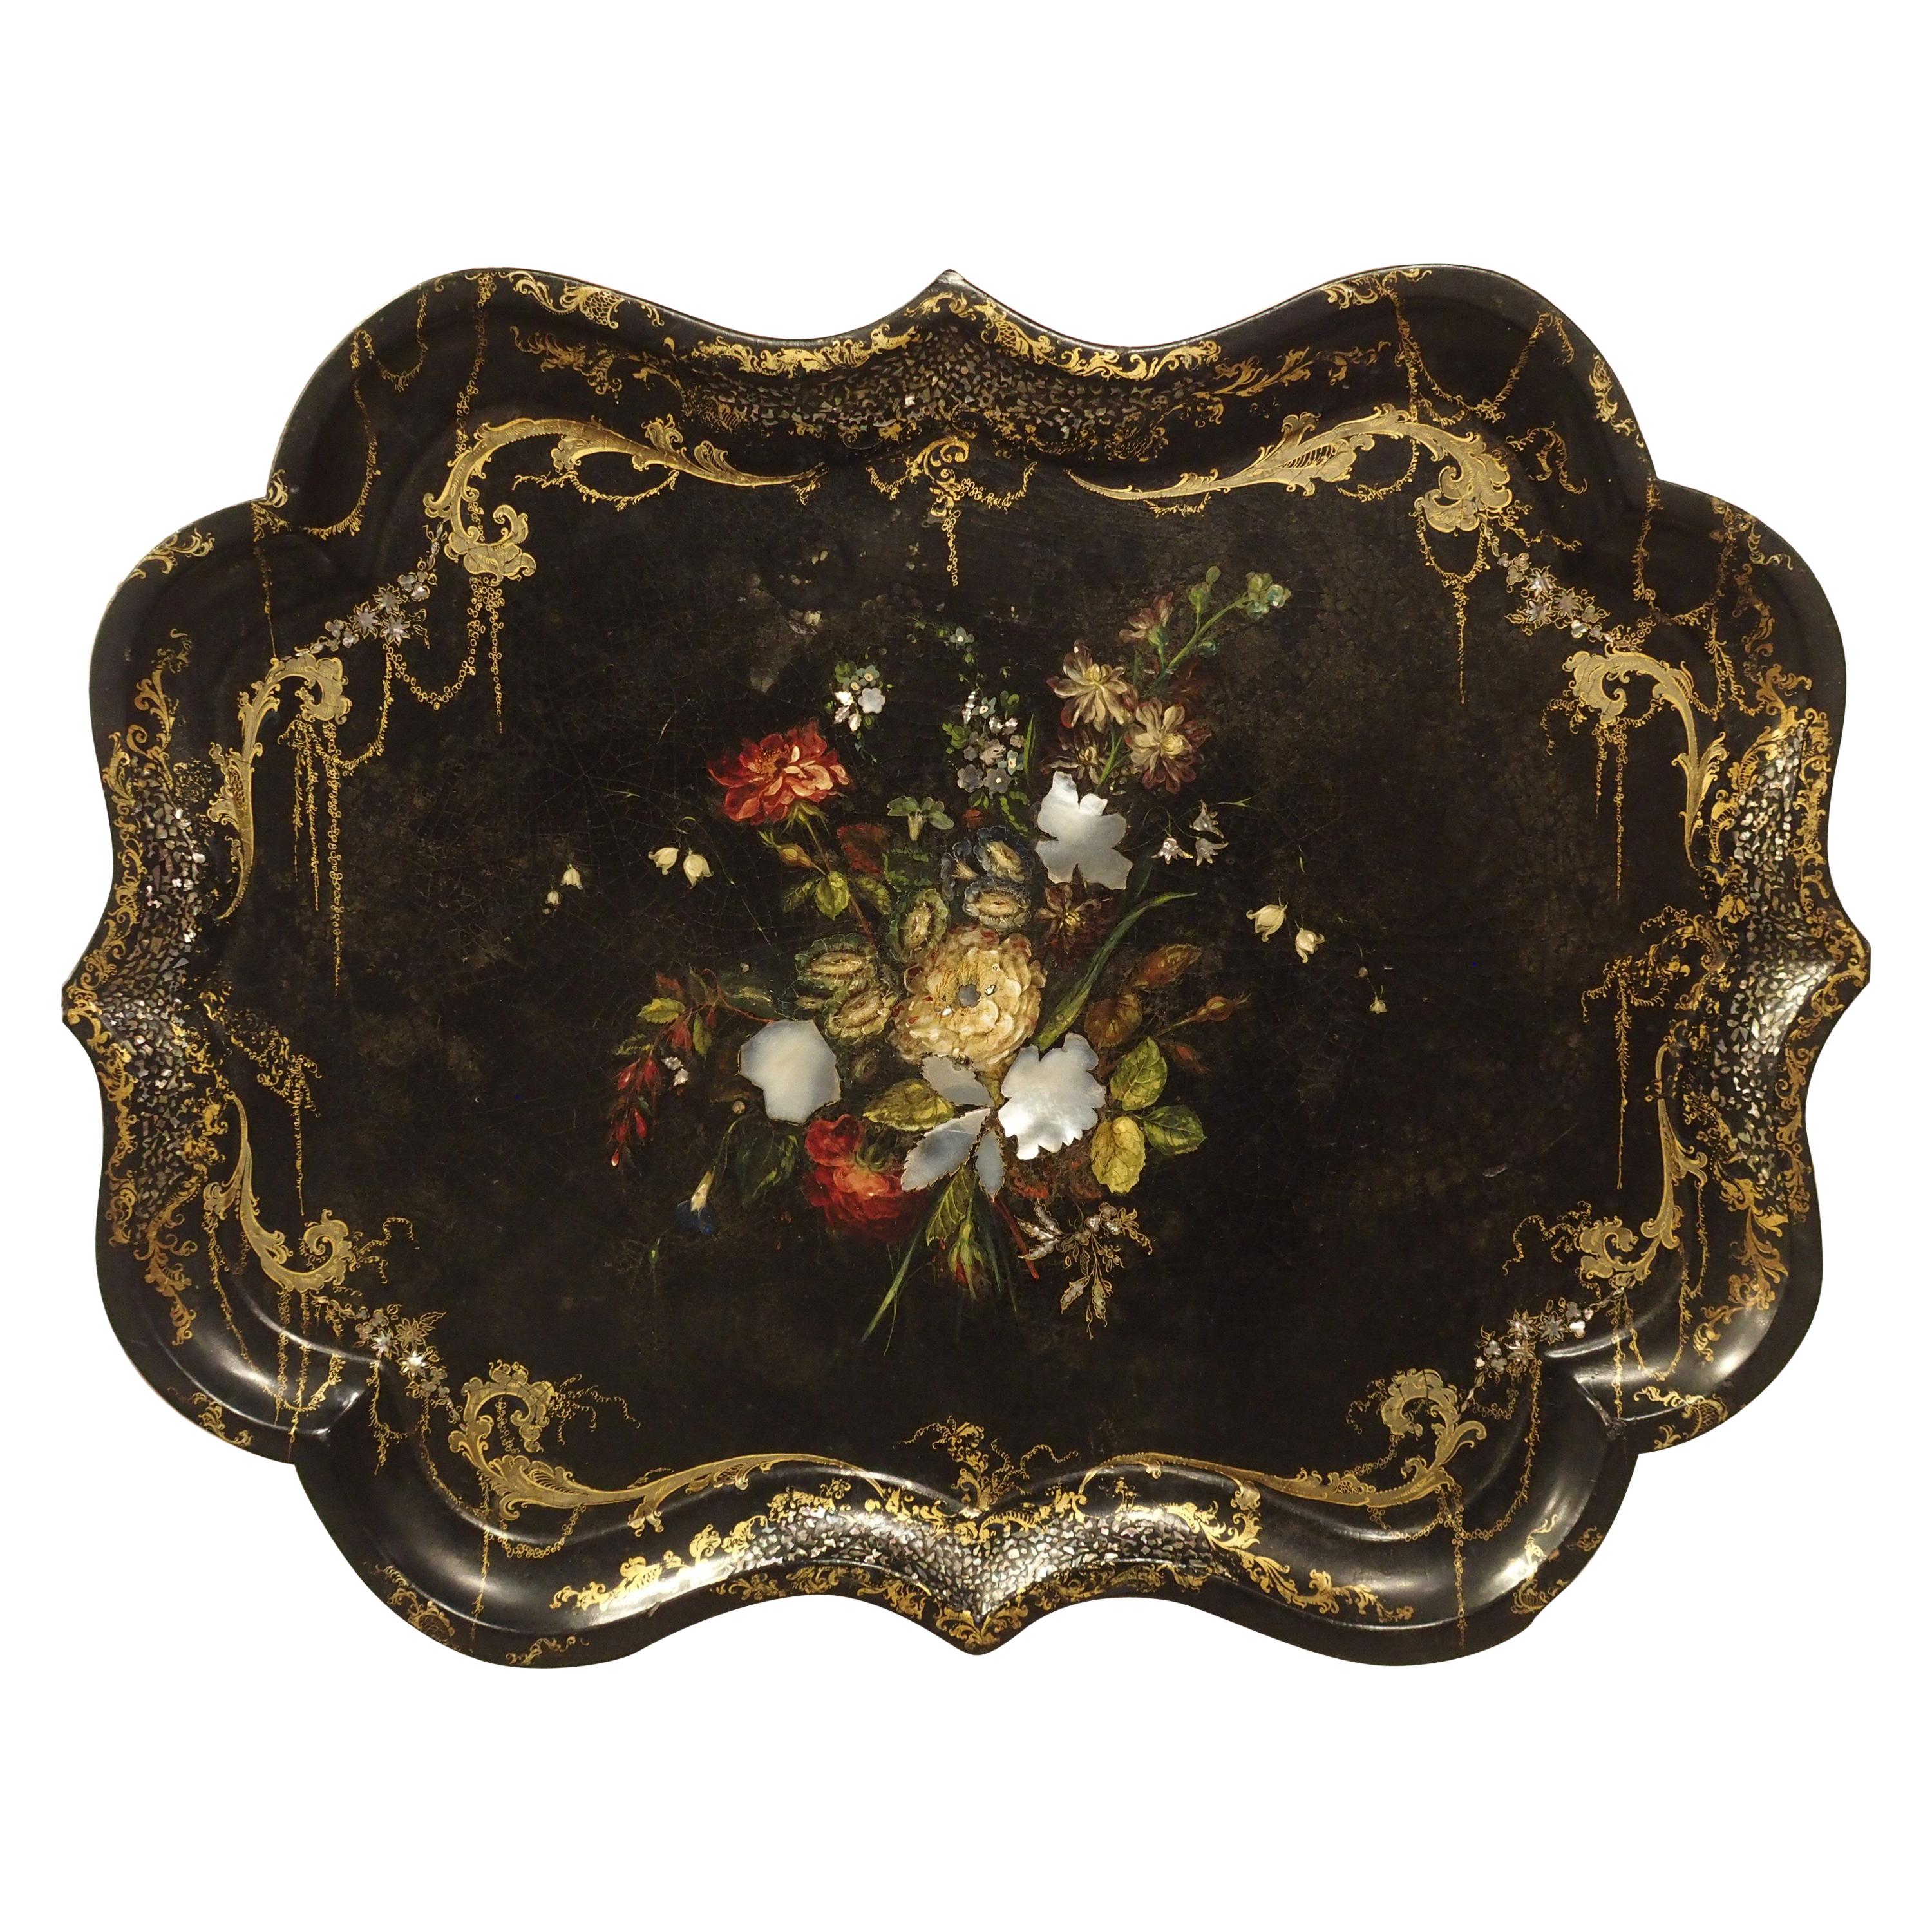 Fine Antique English Painted Tray with Mother of Pearl Insets, circa 1850